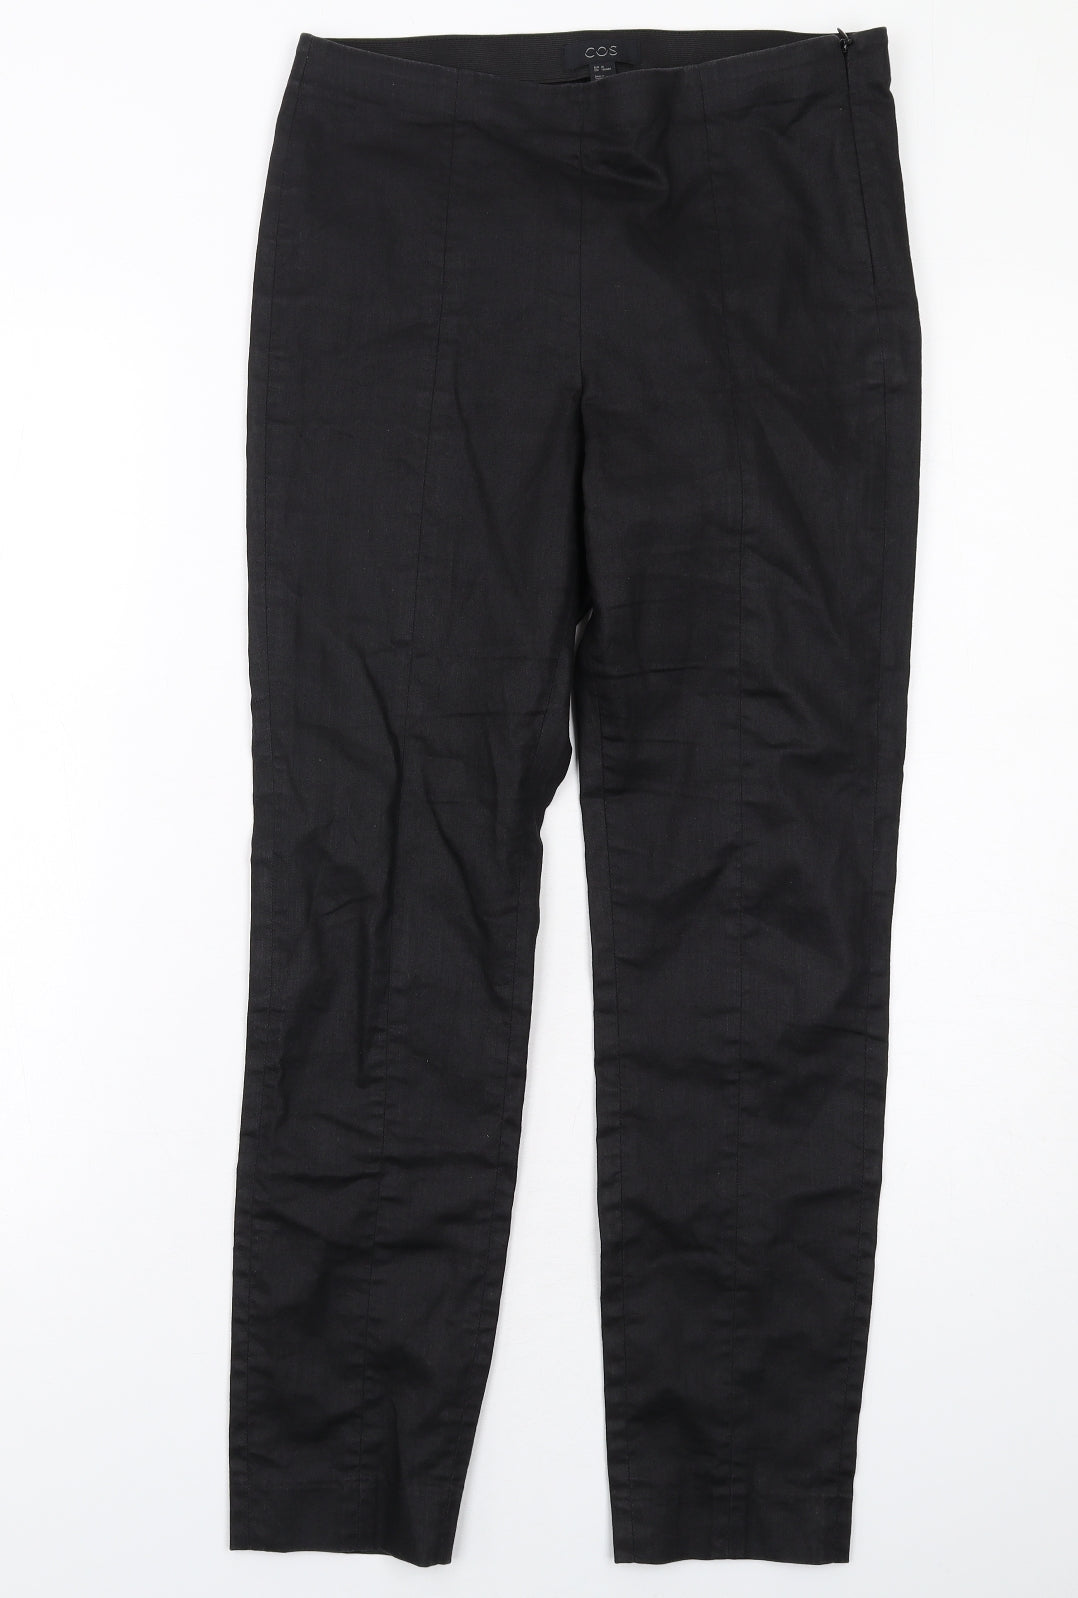 COS Womens Black Cotton Trousers Size 8 L28 in Regular Zip